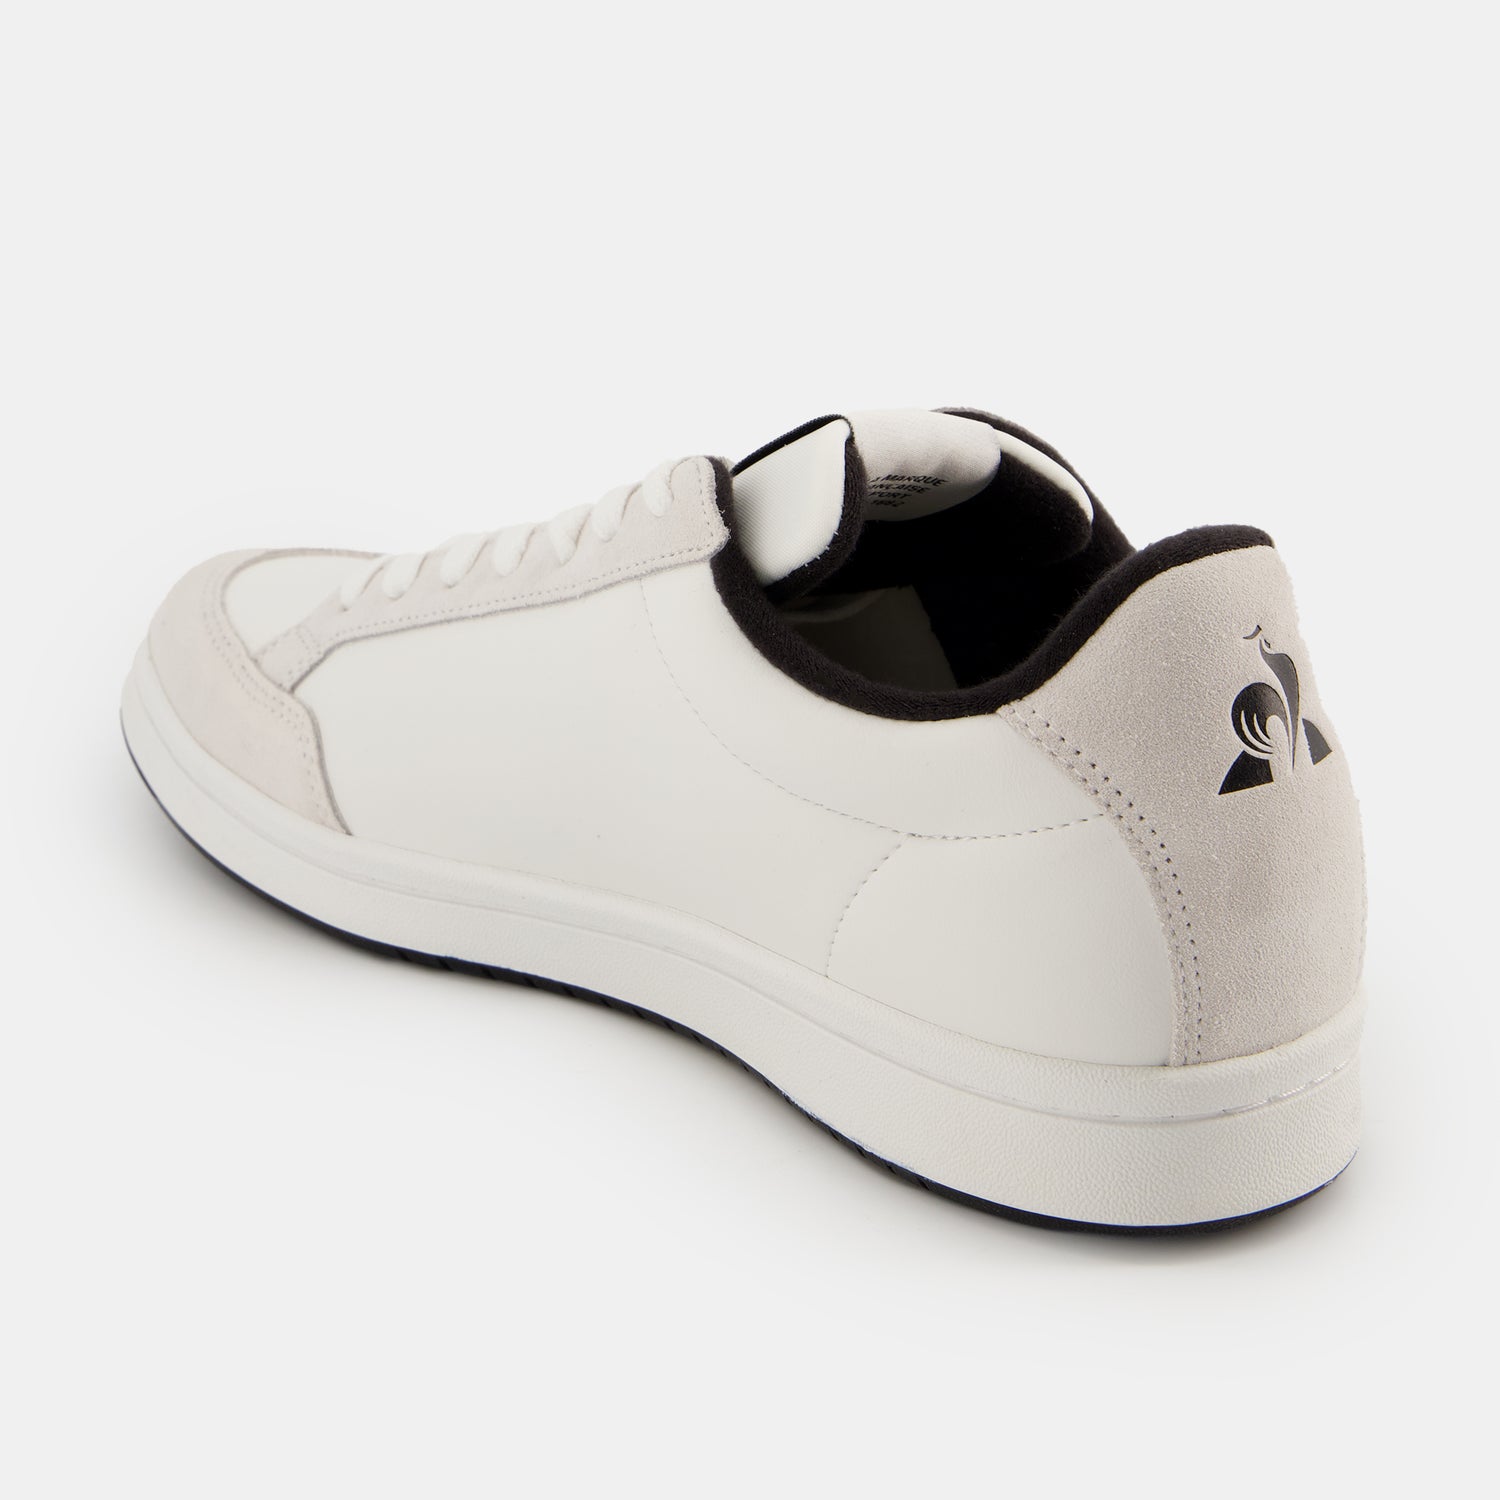 2410678-LCS COURT ROOSTER optical white/black | Chaussures LCS COURT ROOSTER Homme